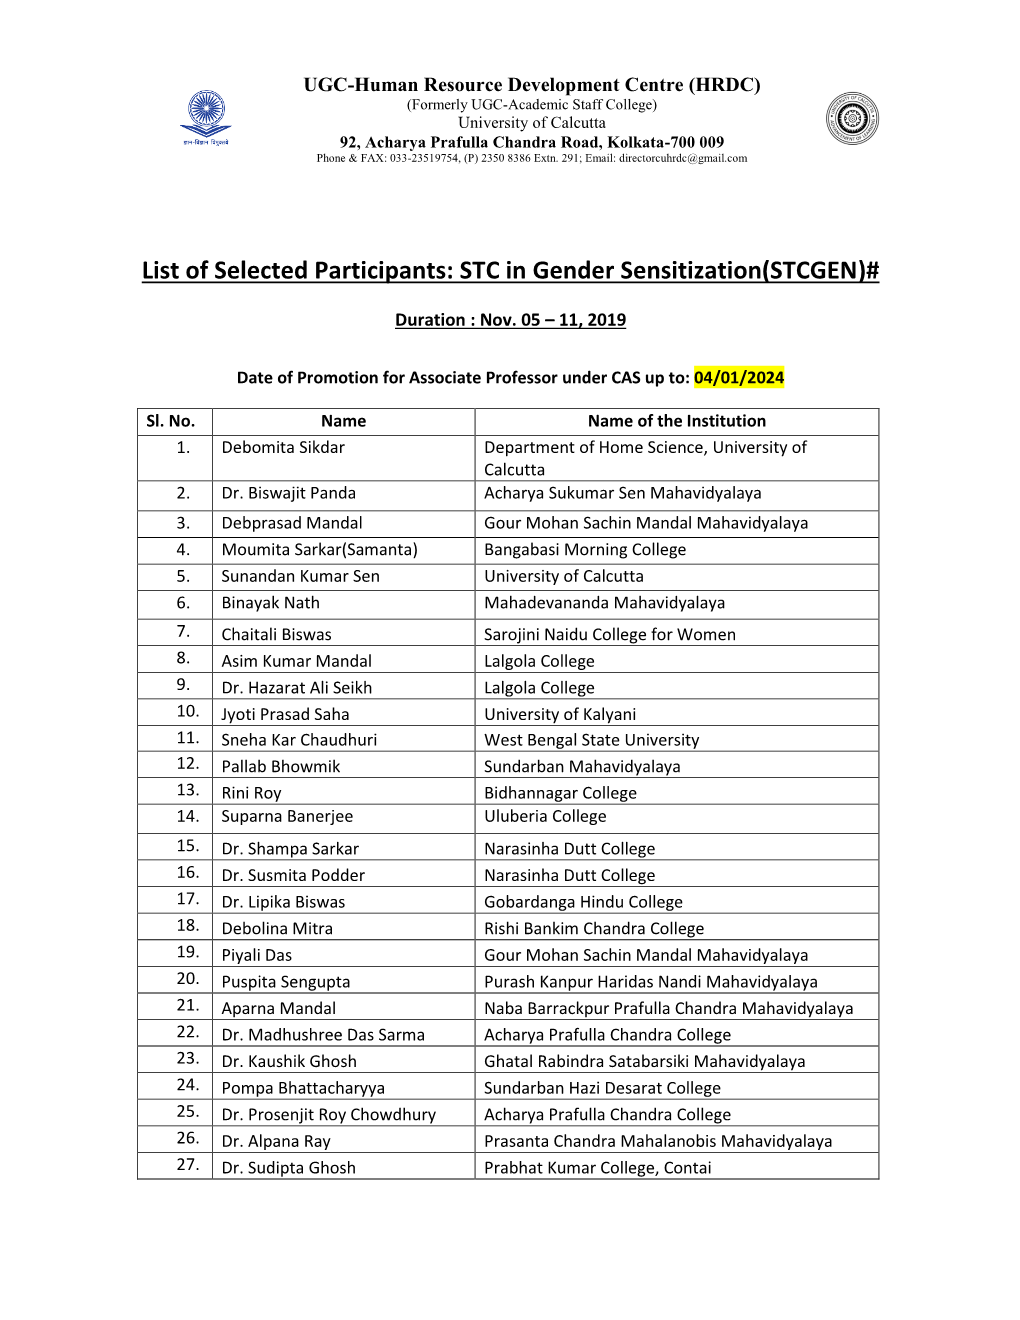 List of Selected Participants: STC in Gender Sensitization(STCGEN)